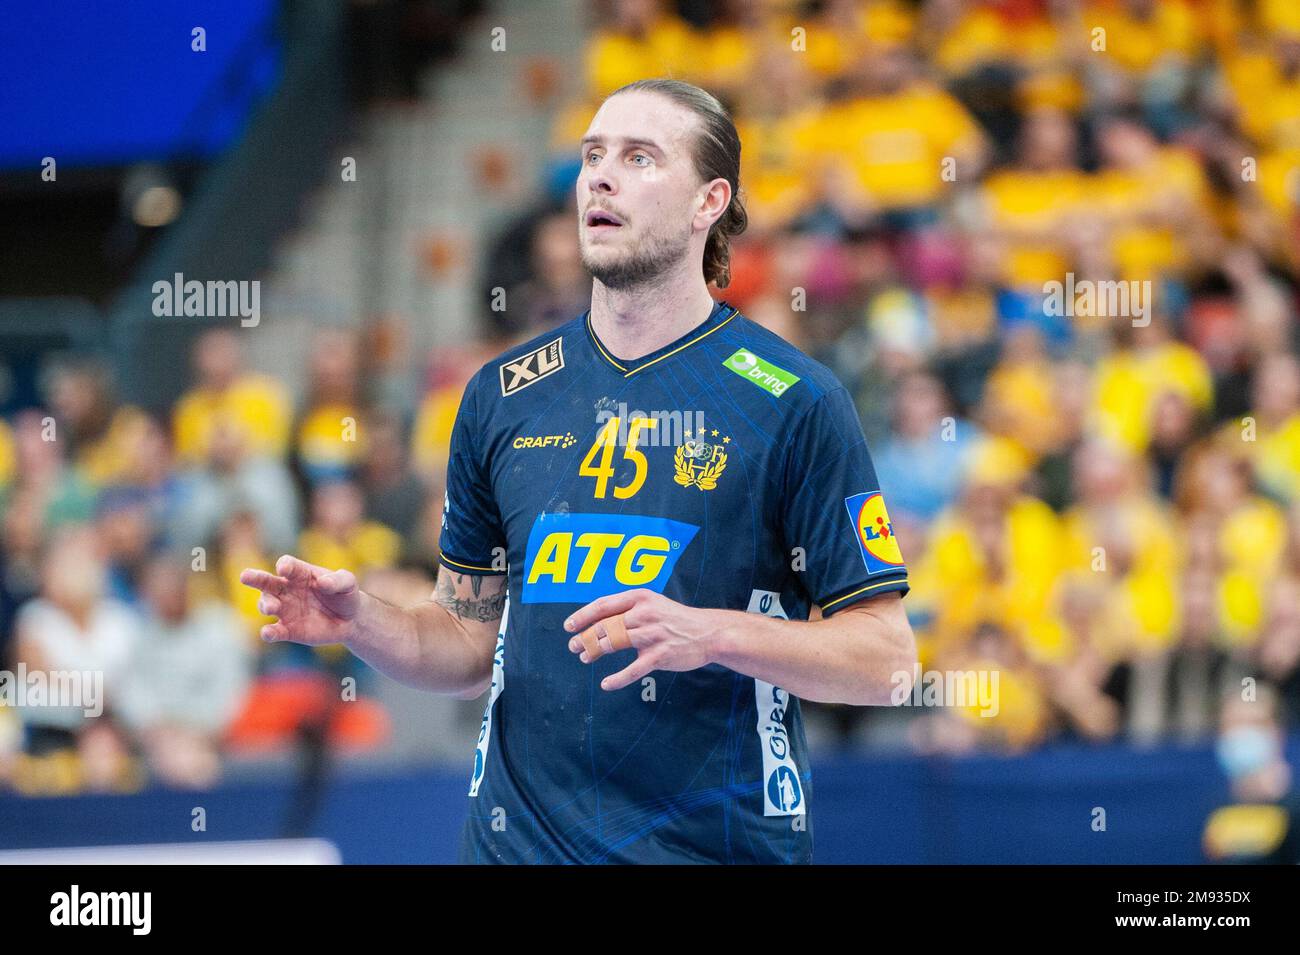 Gothenburg, Sweden. 16th Jan 2023. Olle Forsell Schefvert of Sweden during the 2023 IHF World Men’s Handball Championship game between Uruguay and Sweden on January 16th, 2023 in Gothenburg. Credit: Oskar Olteus / Alamy Live News Stock Photo